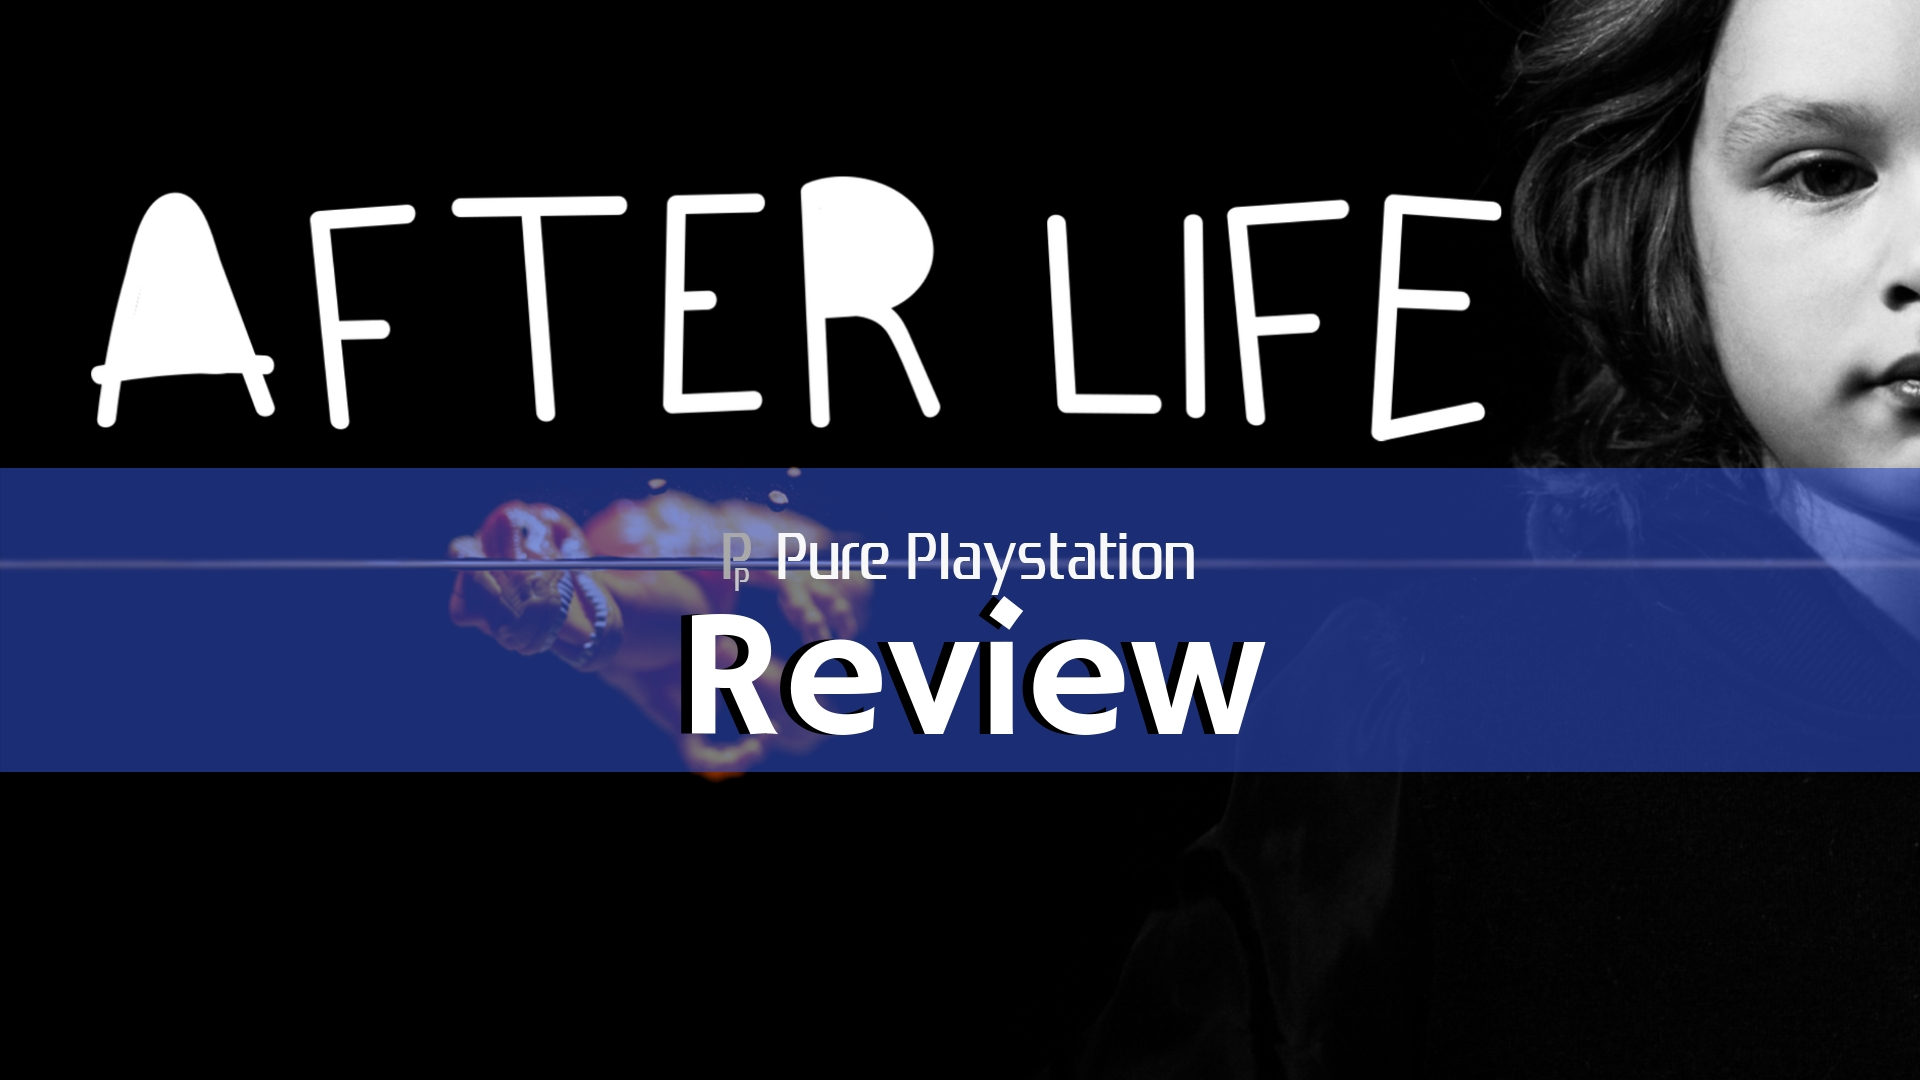 Review: After Life - PS4/PSVR